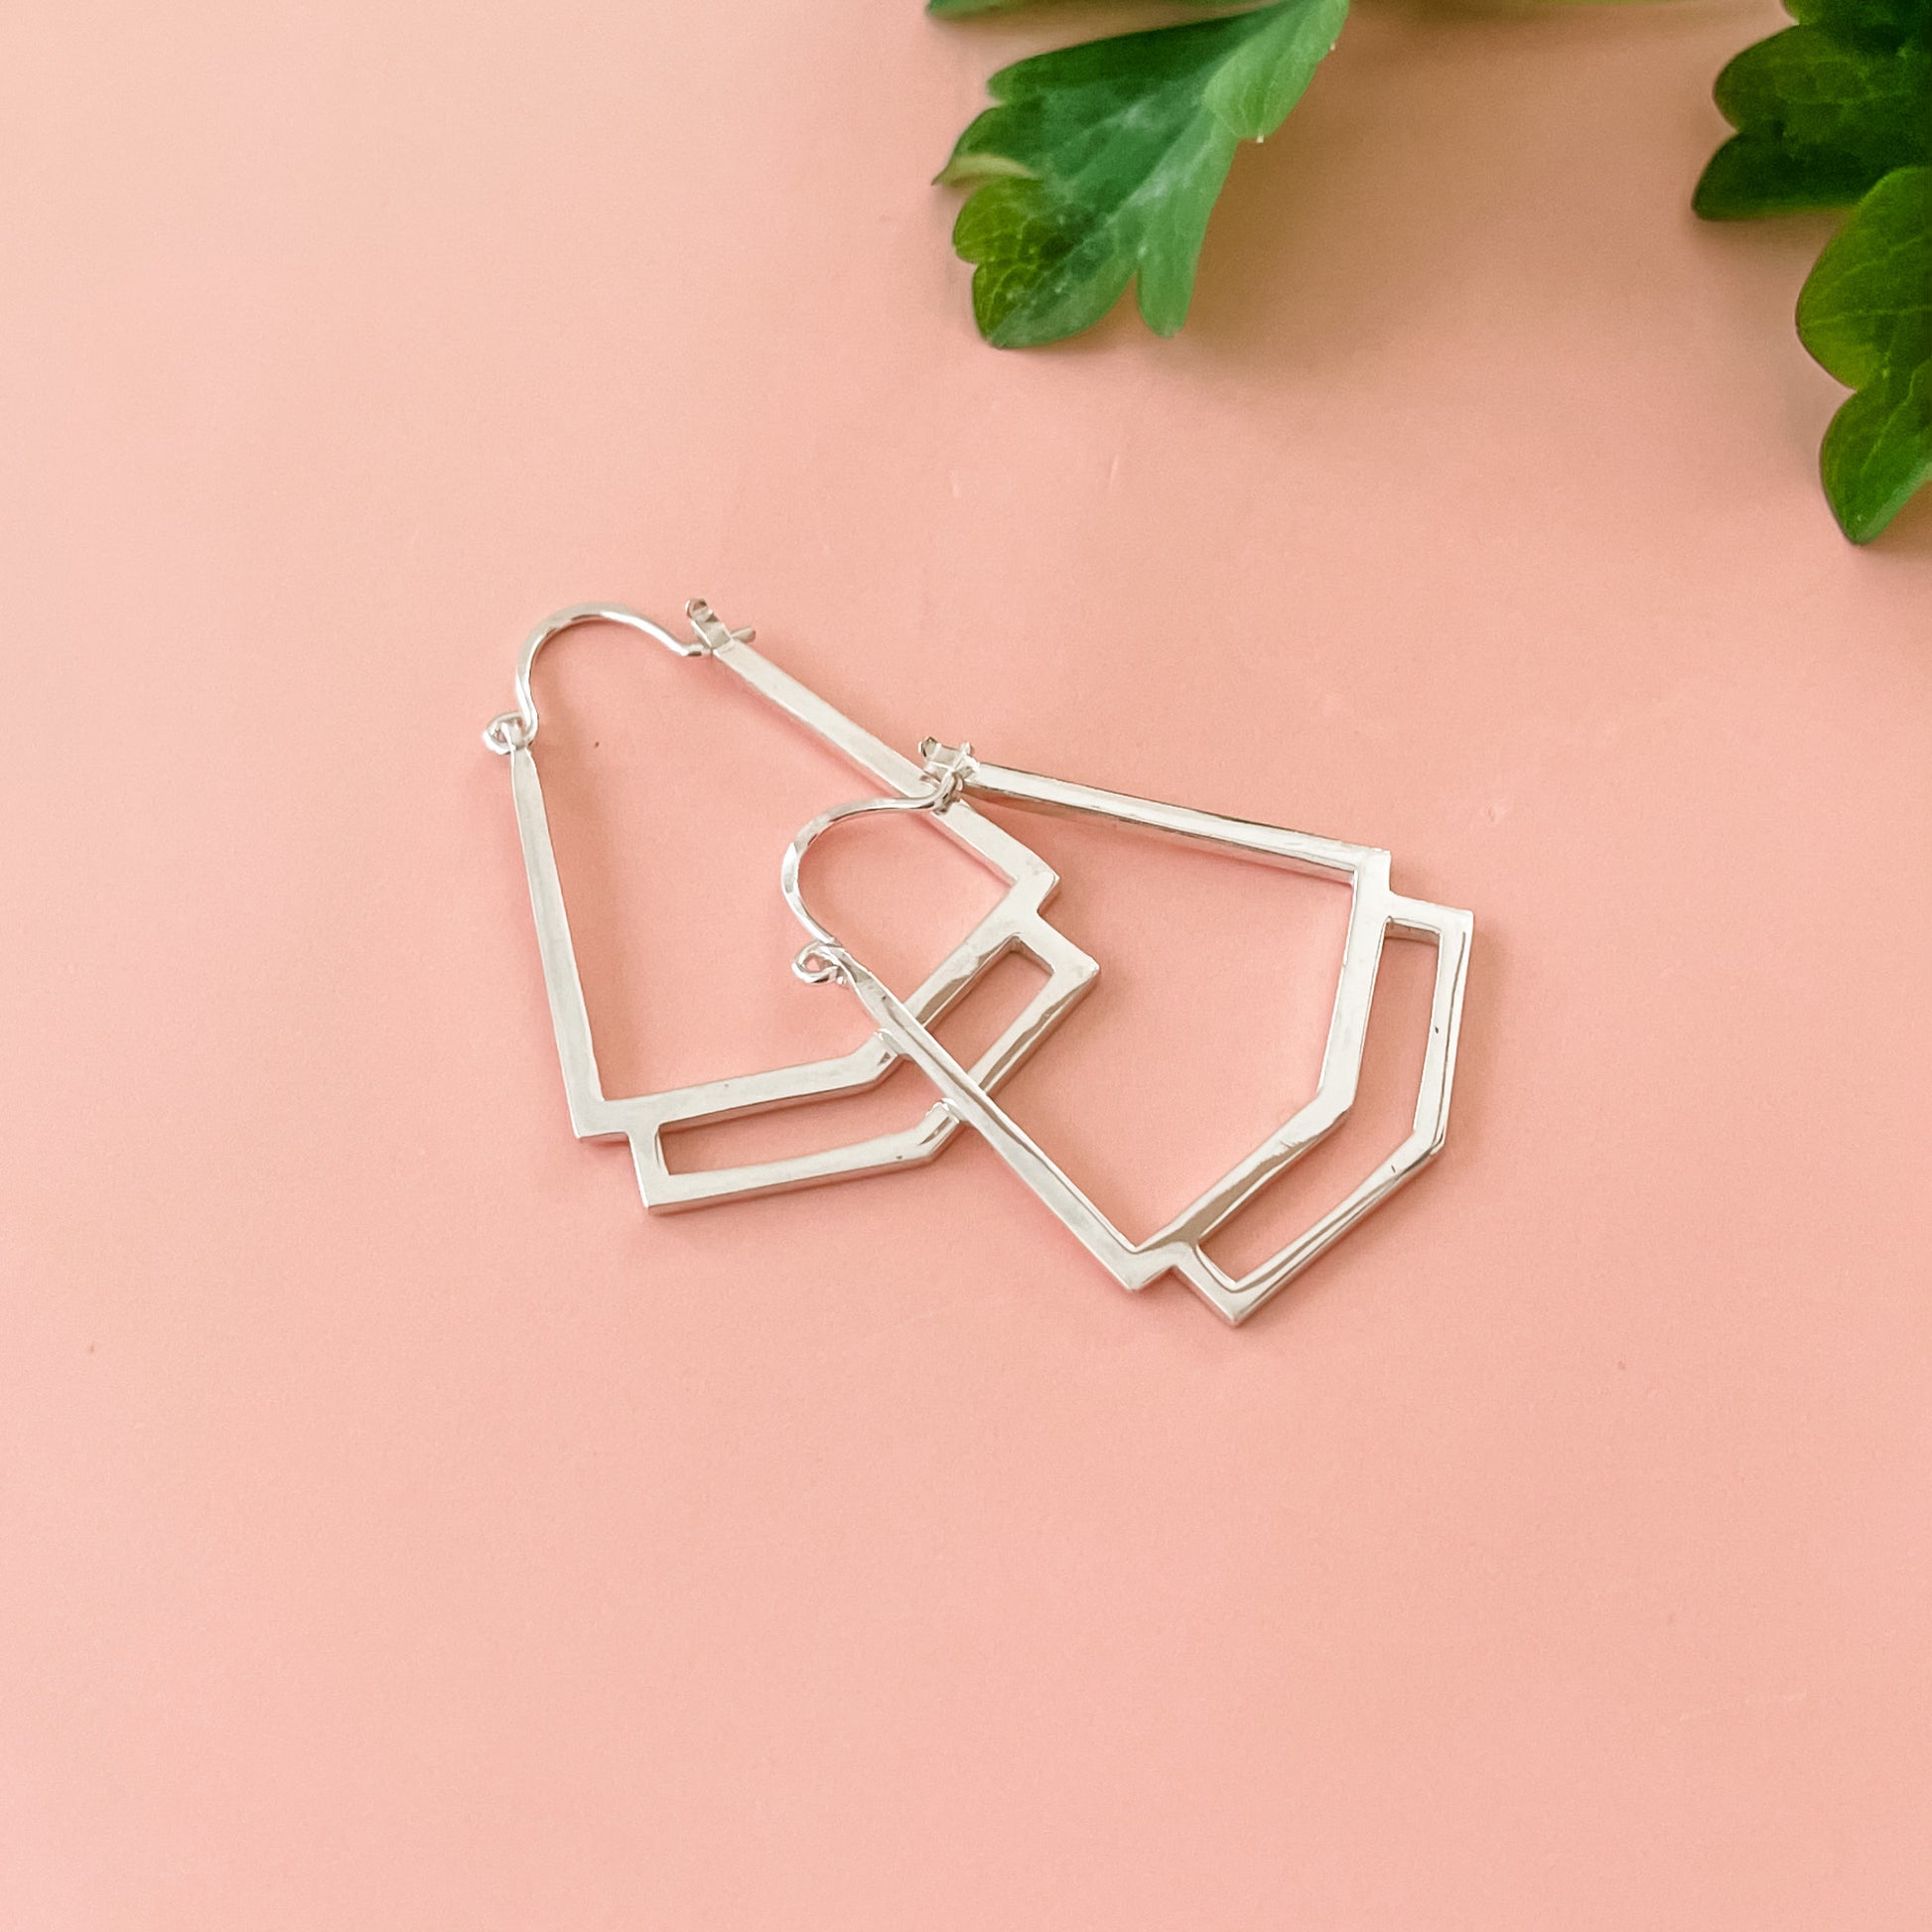 A close up of a pair of handmade sterling silver geometric hoop earrings displayed on a  pink background with greenery